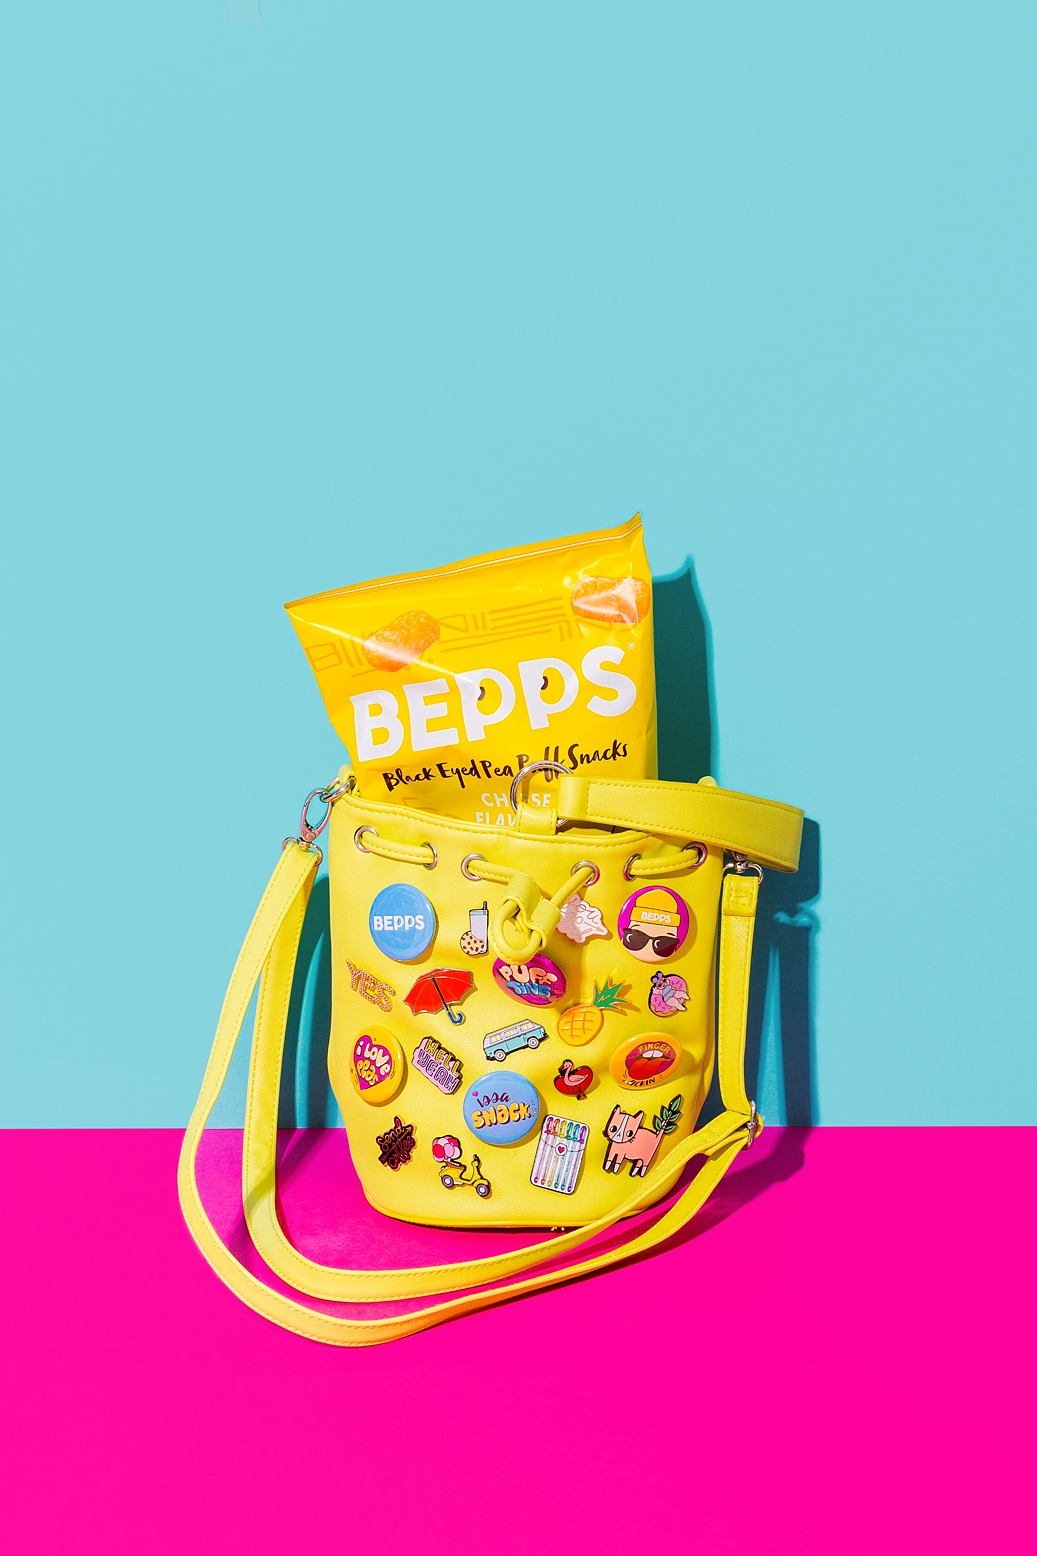 Colourful product photography and content creation for Bepps Snacks by Marianne Taylor.